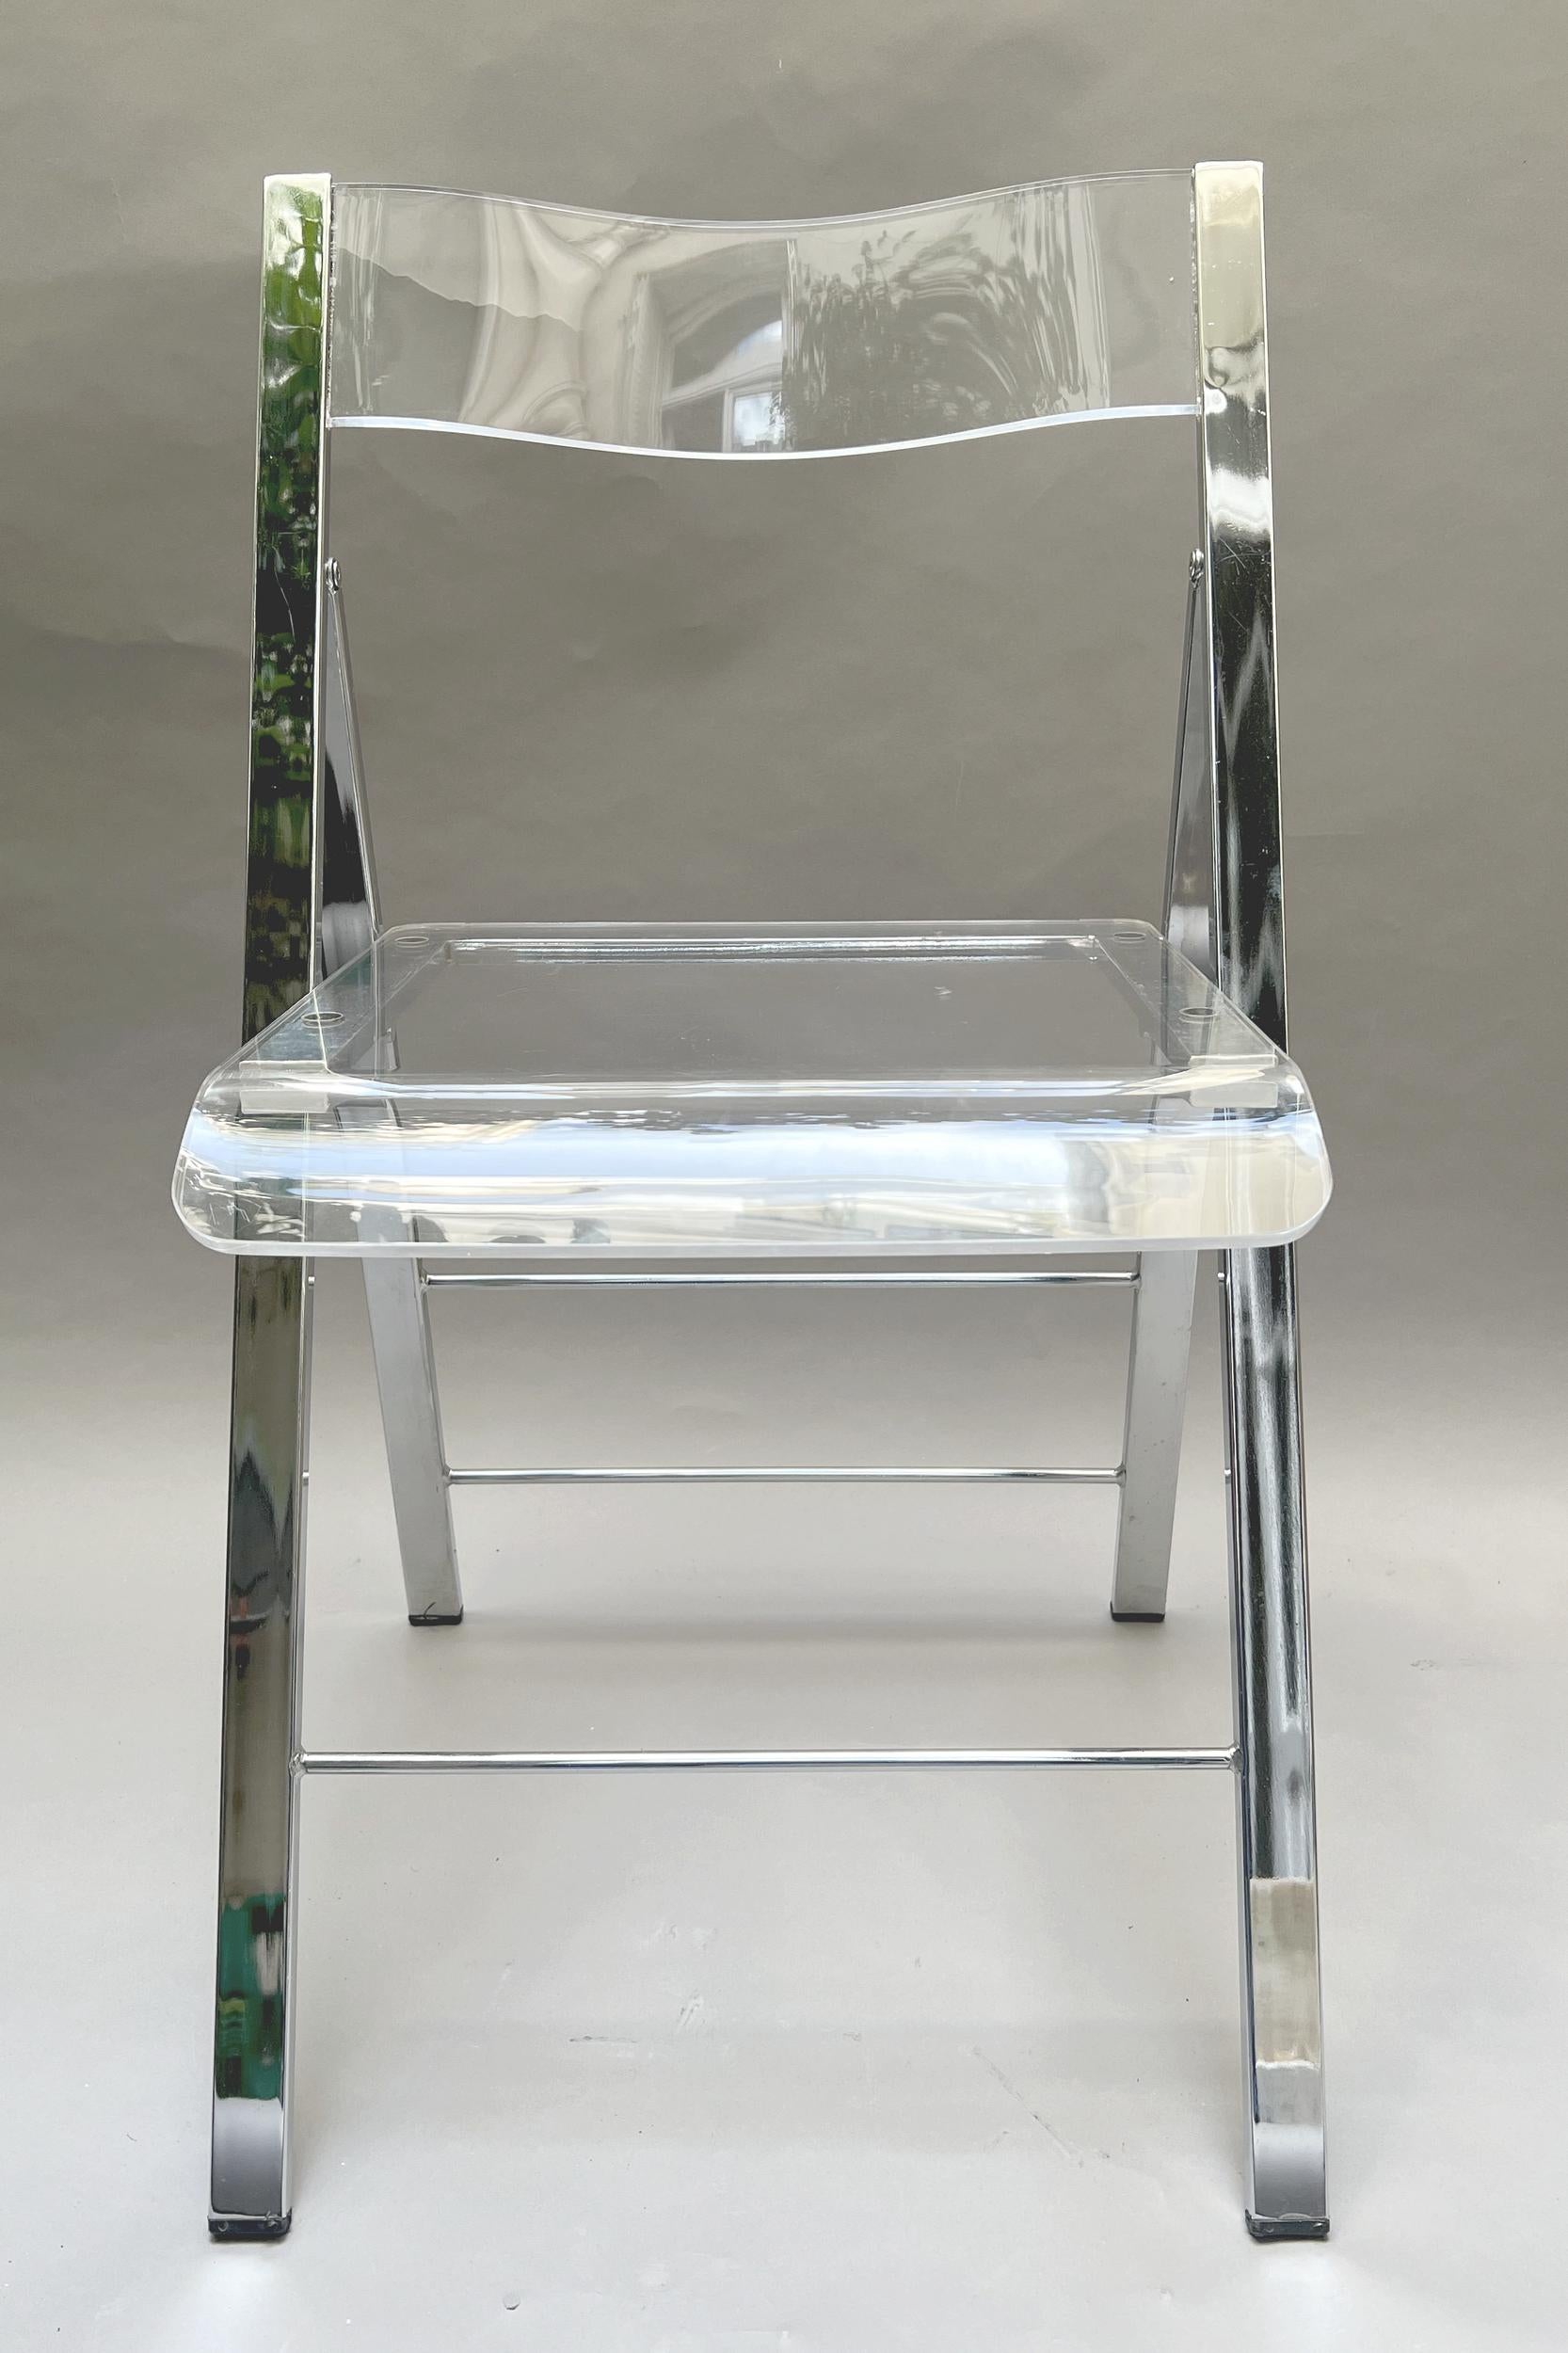 

Set of six folding chairs in thermoformed plexiglass and chromed metal.
Height: 79 cm (31.1 inches)
Width: 45 cm (17.7 inches)
Depth: 44 cm (17.3 inches)
Seat height: 48 cm (18.9 inches)
Thickness of folded chair: 6 cm (2.3 inches)
